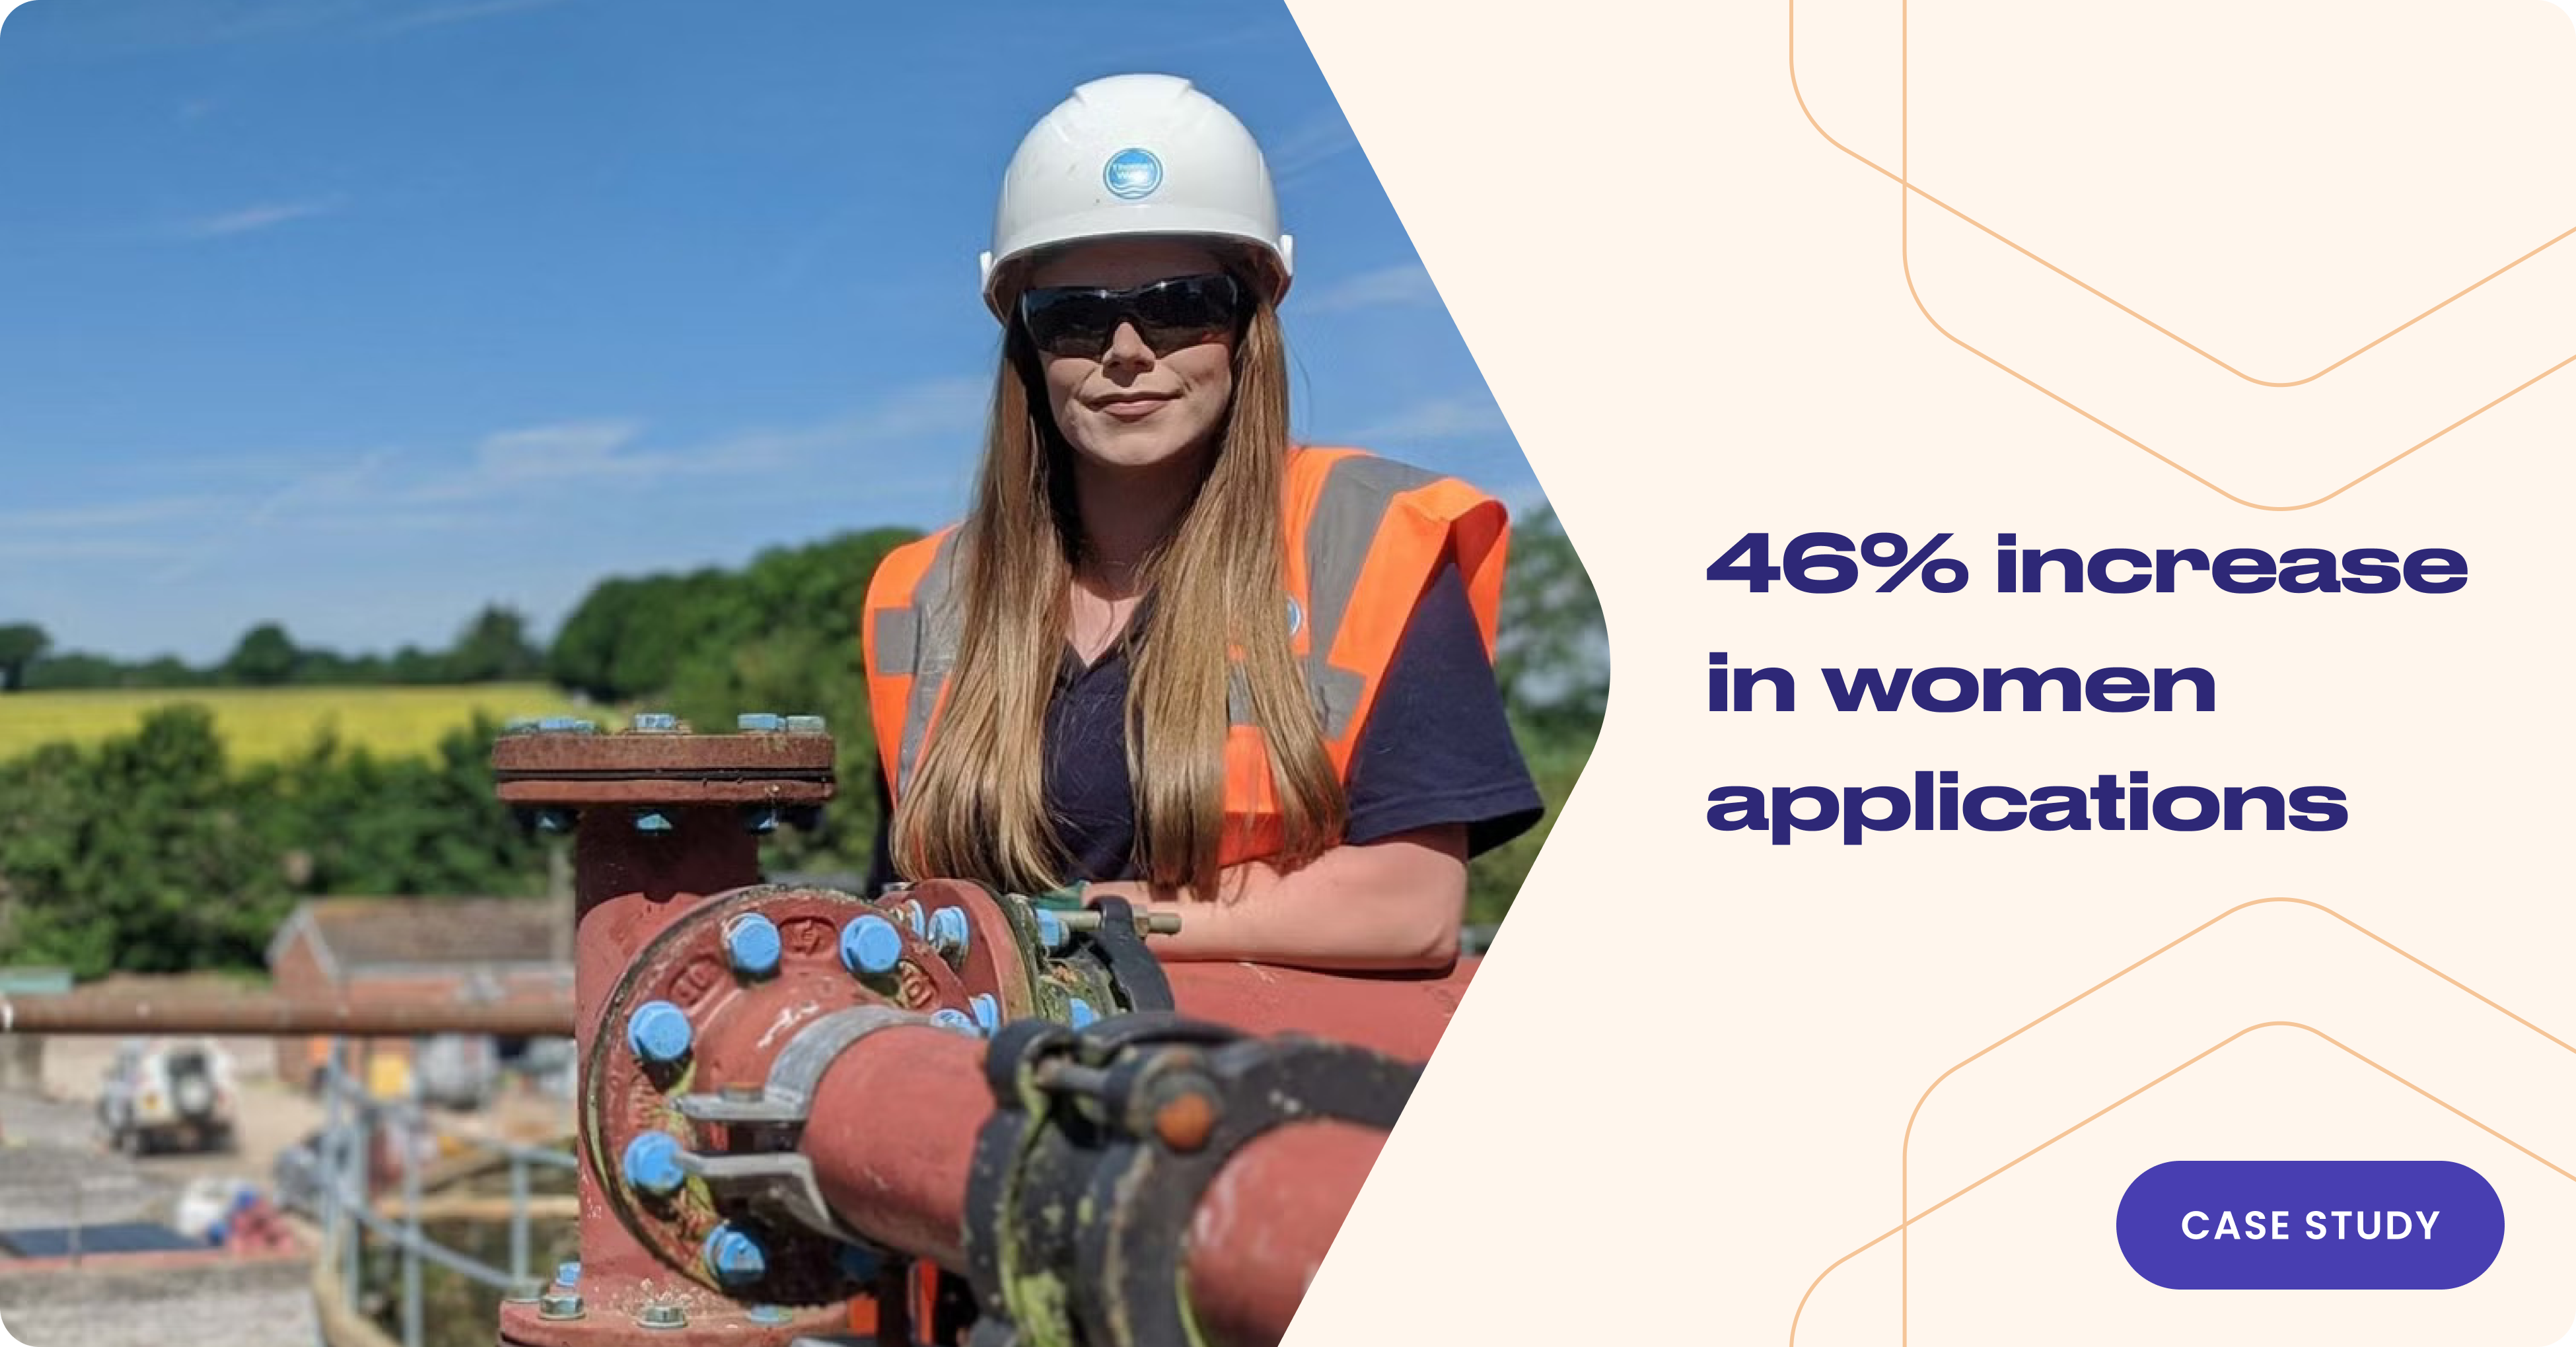 A female sewage engineer wearing a hard hat and safety vest stands confidently next to industrial equipment at a Thames Water site. The text on the image reads, “46% increase in women applications,” highlighting the success of Thames Water’s inclusive hiring practices. The image serves as a case study example of improving gender diversity in traditionally male-dominated roles.​⬤